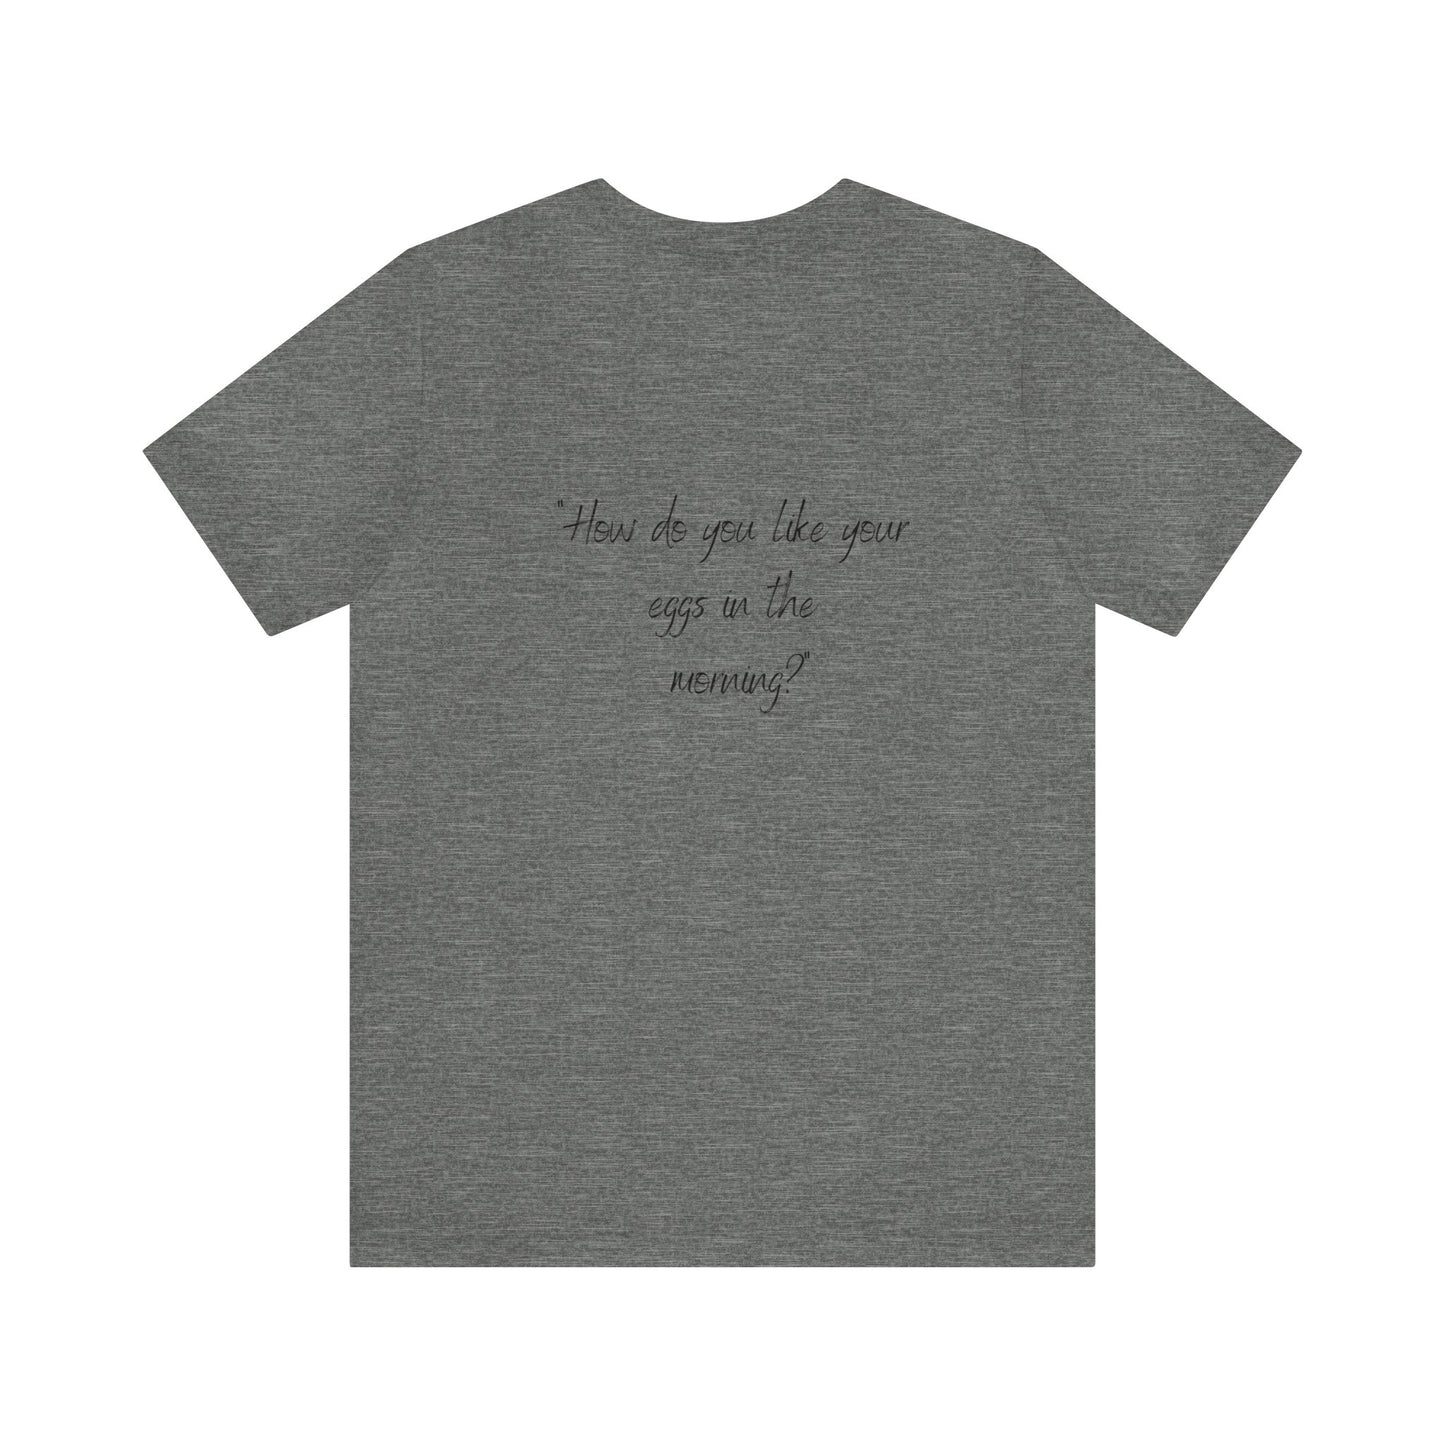 The Office Date Mike tee - Funny the Office shirt - Gift for the Office fan